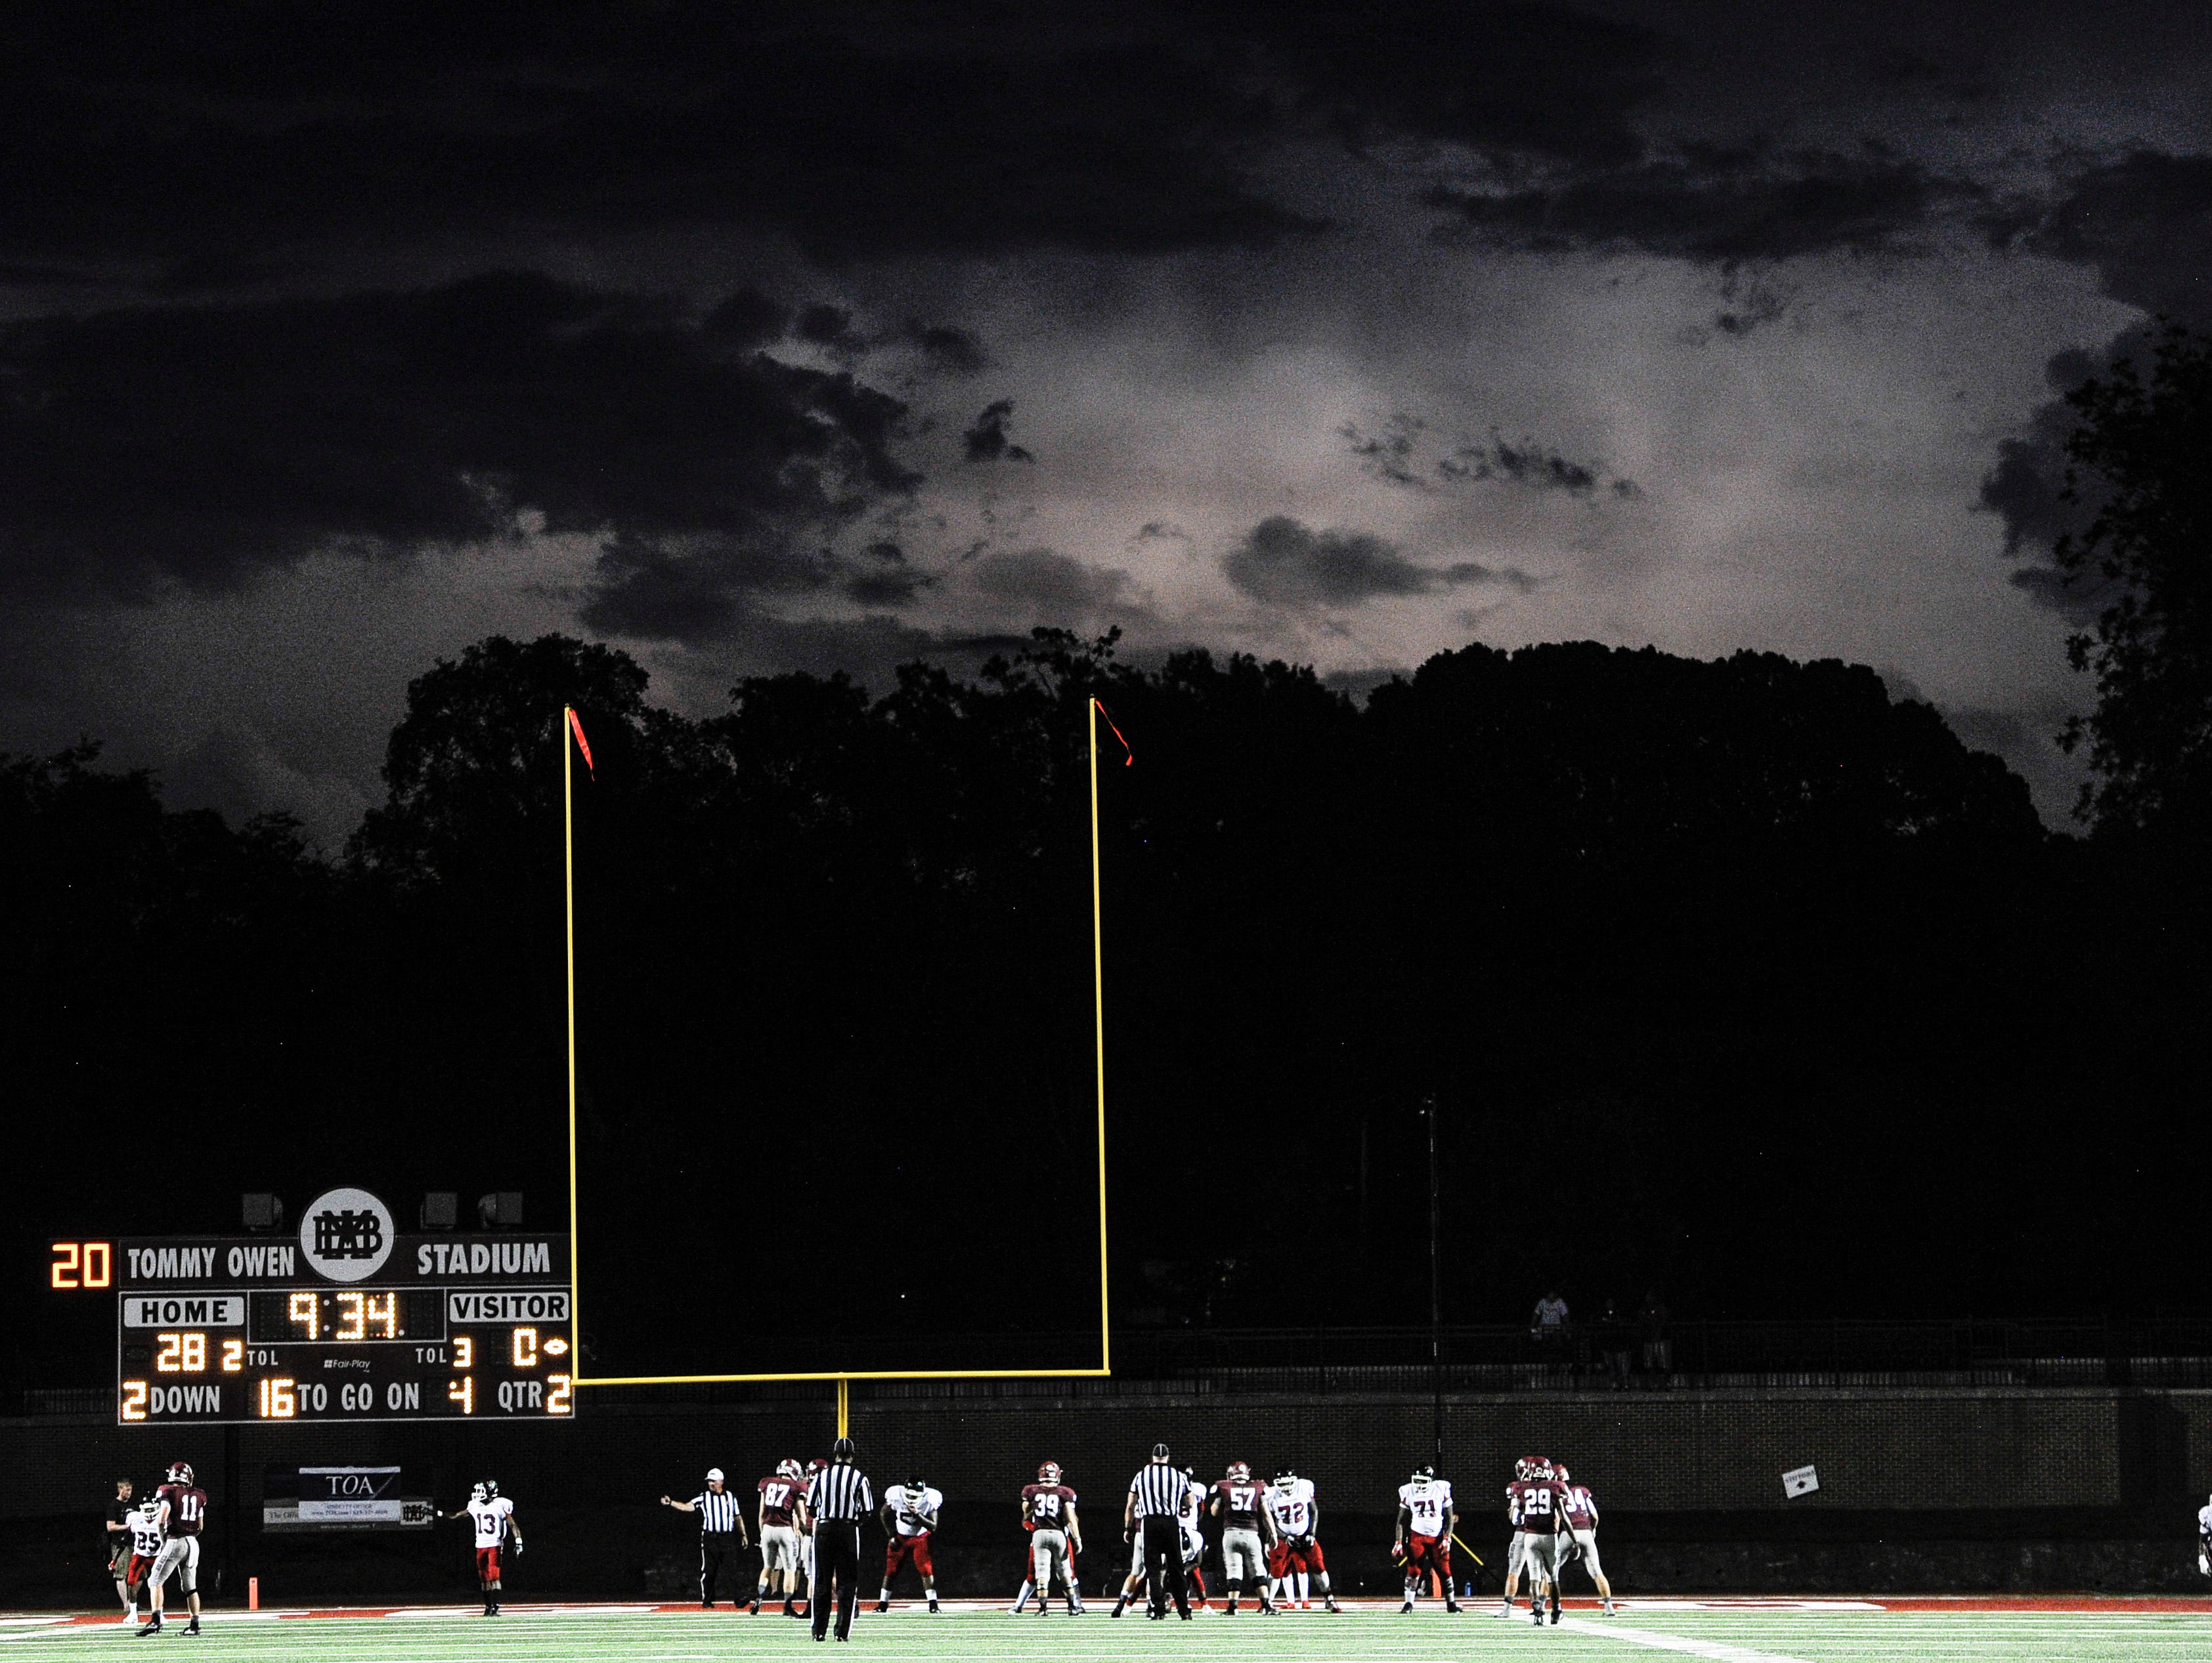 Lightning flashes in the sky as Pearl-Cohn and MBA play their game during the first half Friday. MBA won 49-7 with the game ending with 5:46 left in the third quarter due to lightning. Both coaches declared MBA the winner and it was not resumed.